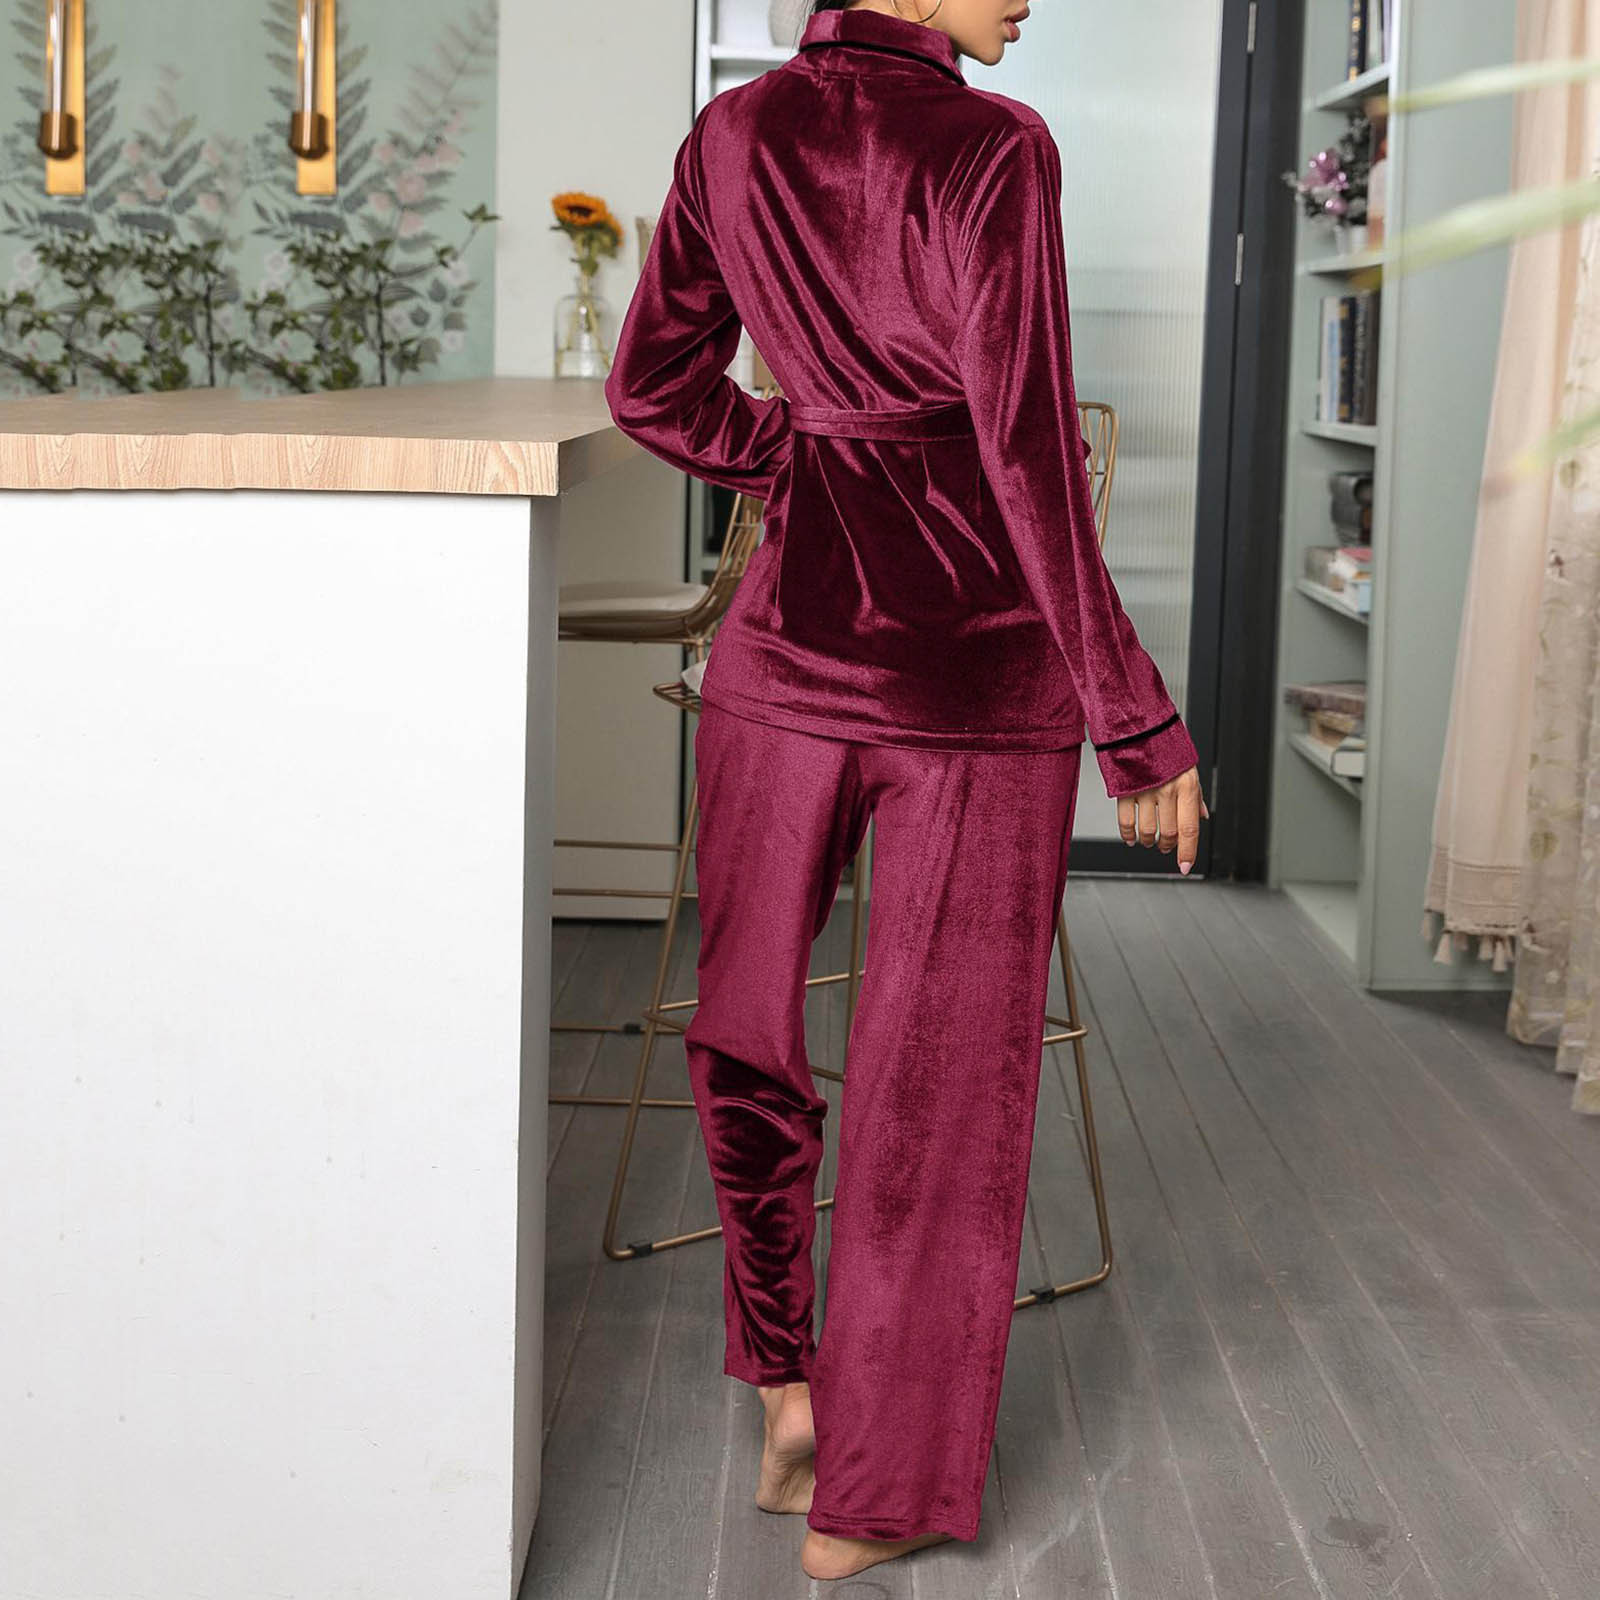 Velour Pjs for Women Sets,Ladies Velvet Pyjama Set Two Pieces Long Sleeve Casual V Neck Wrap Sweatshirt and Lounge Bottoms Nightwear Loungwear Autumn Winter Pajama Sets Sale Clearance - image 5 of 5